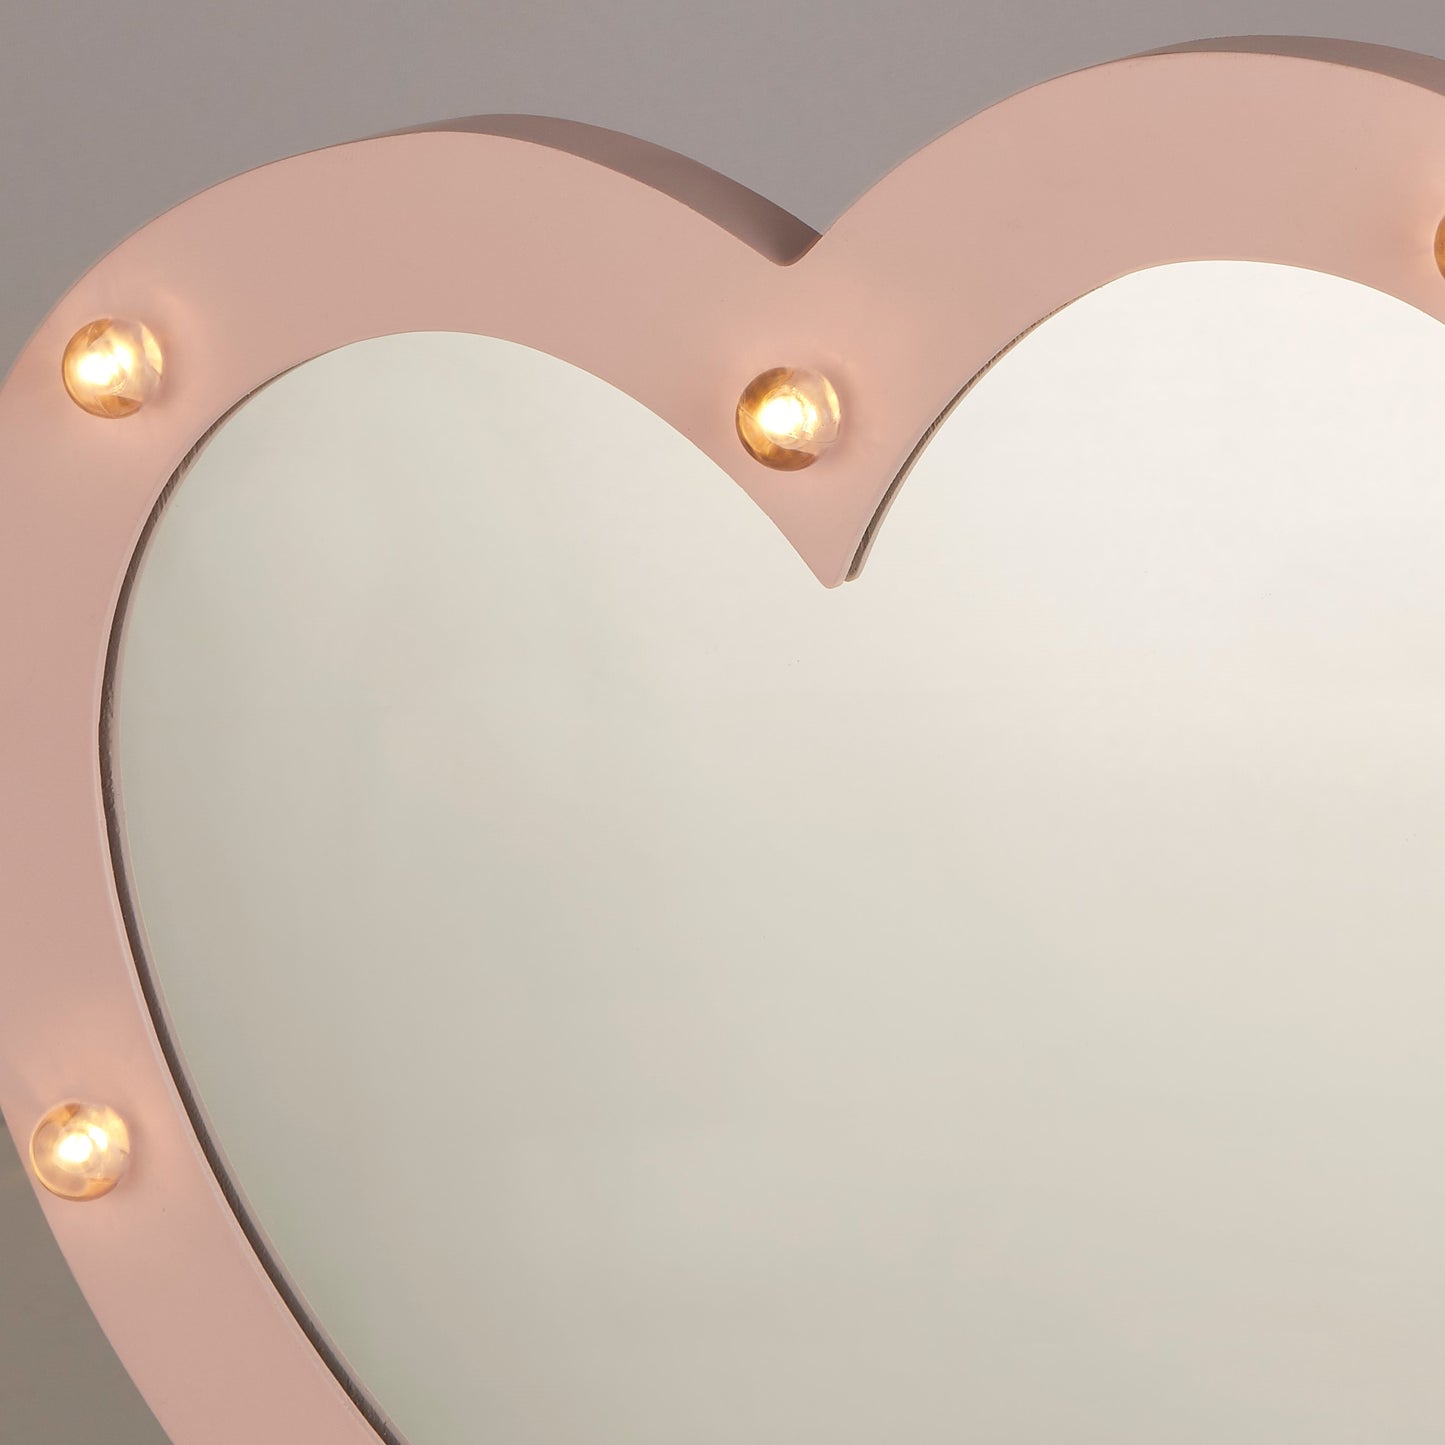 The Amore wooden pink love heart mirror with built in led hollywood style bulbs is perfect to add style and elegance to any room. A great finishing touch to any girls bedroom or dressing room. This mirror light is battery operated so no installation is required simply attached to a wall or the desired surface. Easy to access on/off switch is at the side making this light the perfect addition.  